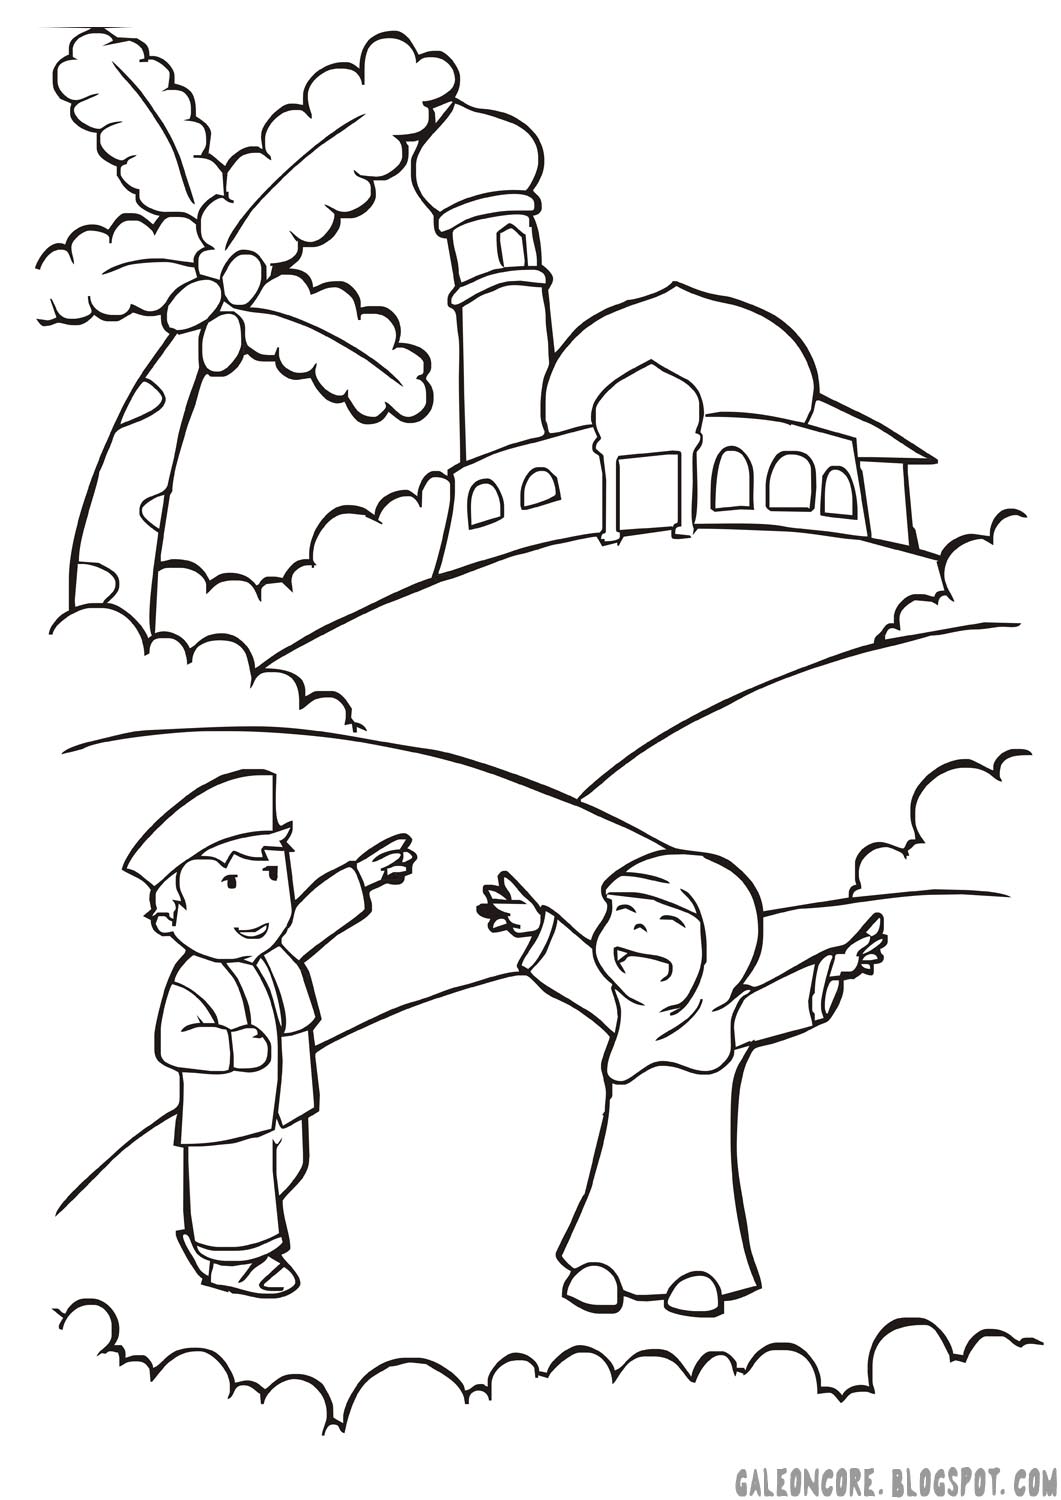 Coloring pages, Islam and Coloring on Pinterest